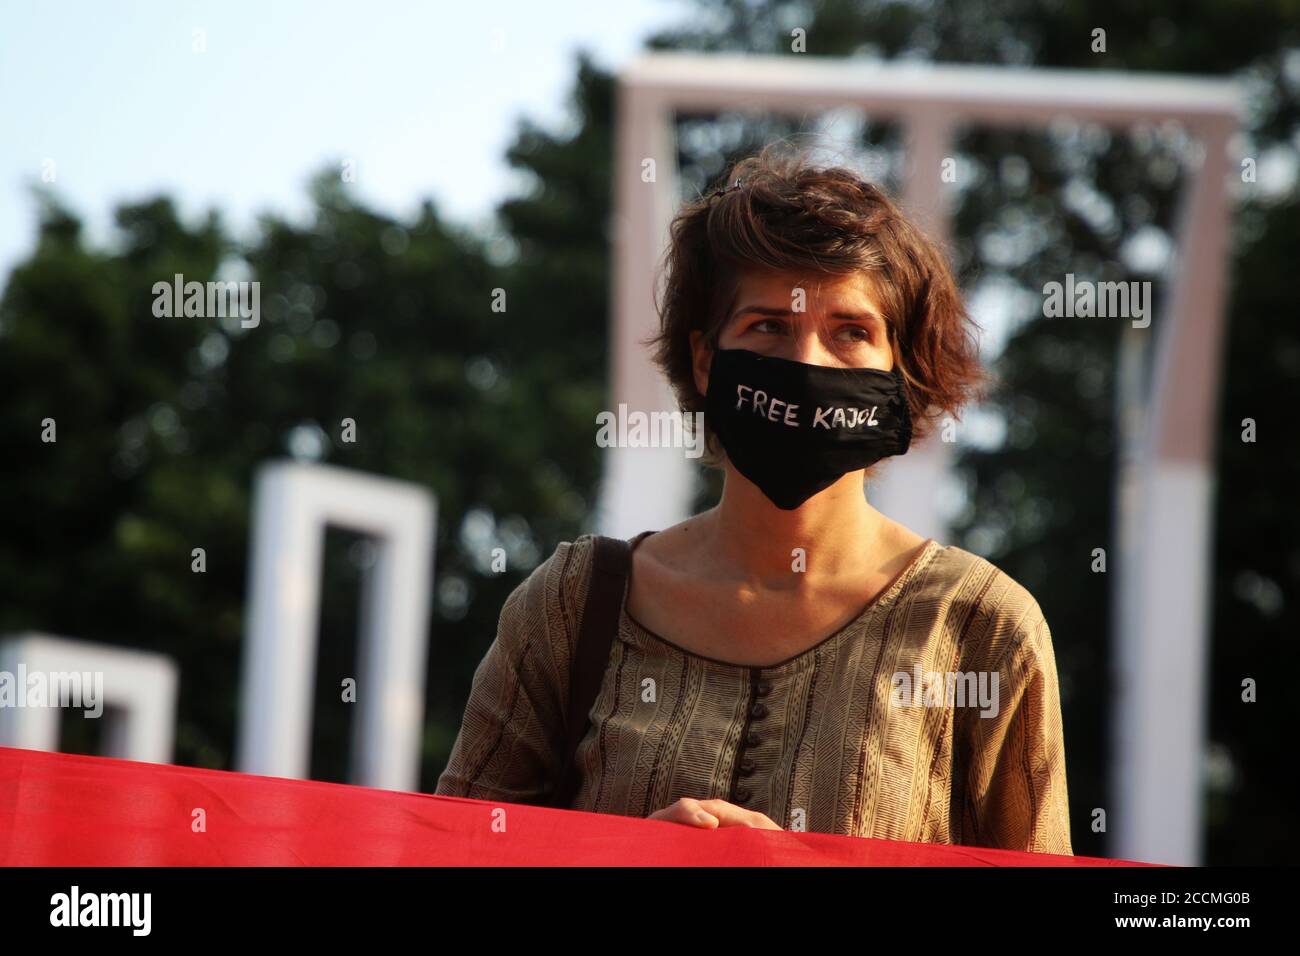 A protester is seen wearing a facemask with writings free Kajol (Photojournalist Shafiqul Islam Kajol who was sent to jail under section 54 of the Code of Criminal Procedure), during the demonstration.Activists and artists protest against the persecution and arrests of fellow artists and journalists under the draconian Digital Security Act, during the COVID-19 pandemic. Stock Photo